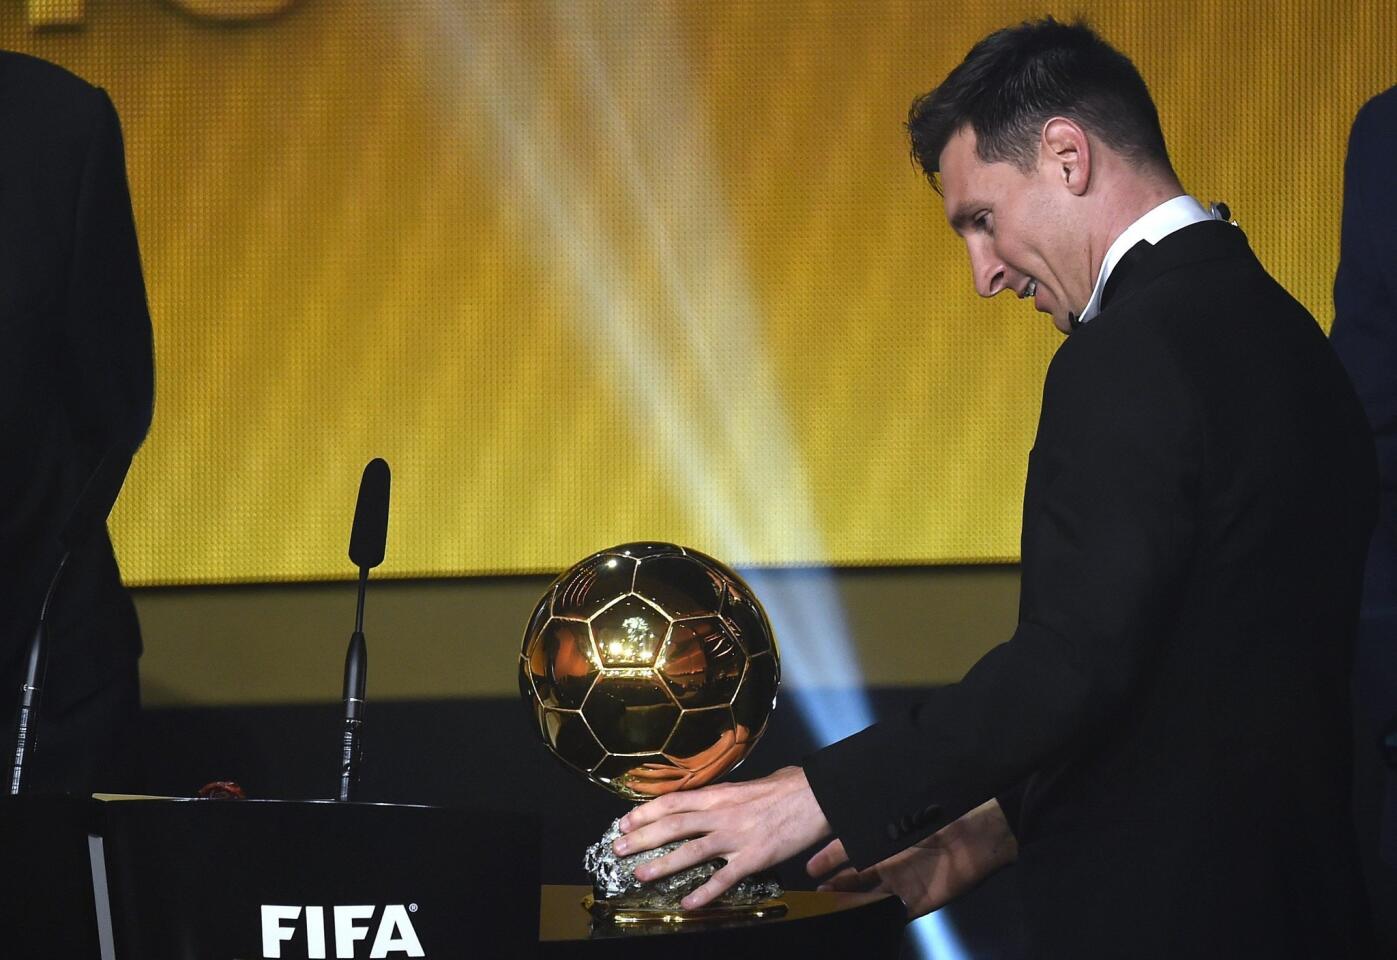 FC Barcelona and Argentina's forward Lionel Messi (C) delivers a speech flanked by FIFA interim president Issa Hayatou (L) and Brazil and Orlando City midfielder Kaka after receiving the 2015 FIFA Ballon dOr award for player of the year during the 2015 FIFA Ballon d'Or award ceremony at the Kongresshaus in Zurich on January 11, 2016. AFP PHOTO / FABRICE COFFRINIFABRICE COFFRINI/AFP/Getty Images ** OUTS - ELSENT, FPG, CM - OUTS * NM, PH, VA if sourced by CT, LA or MoD **